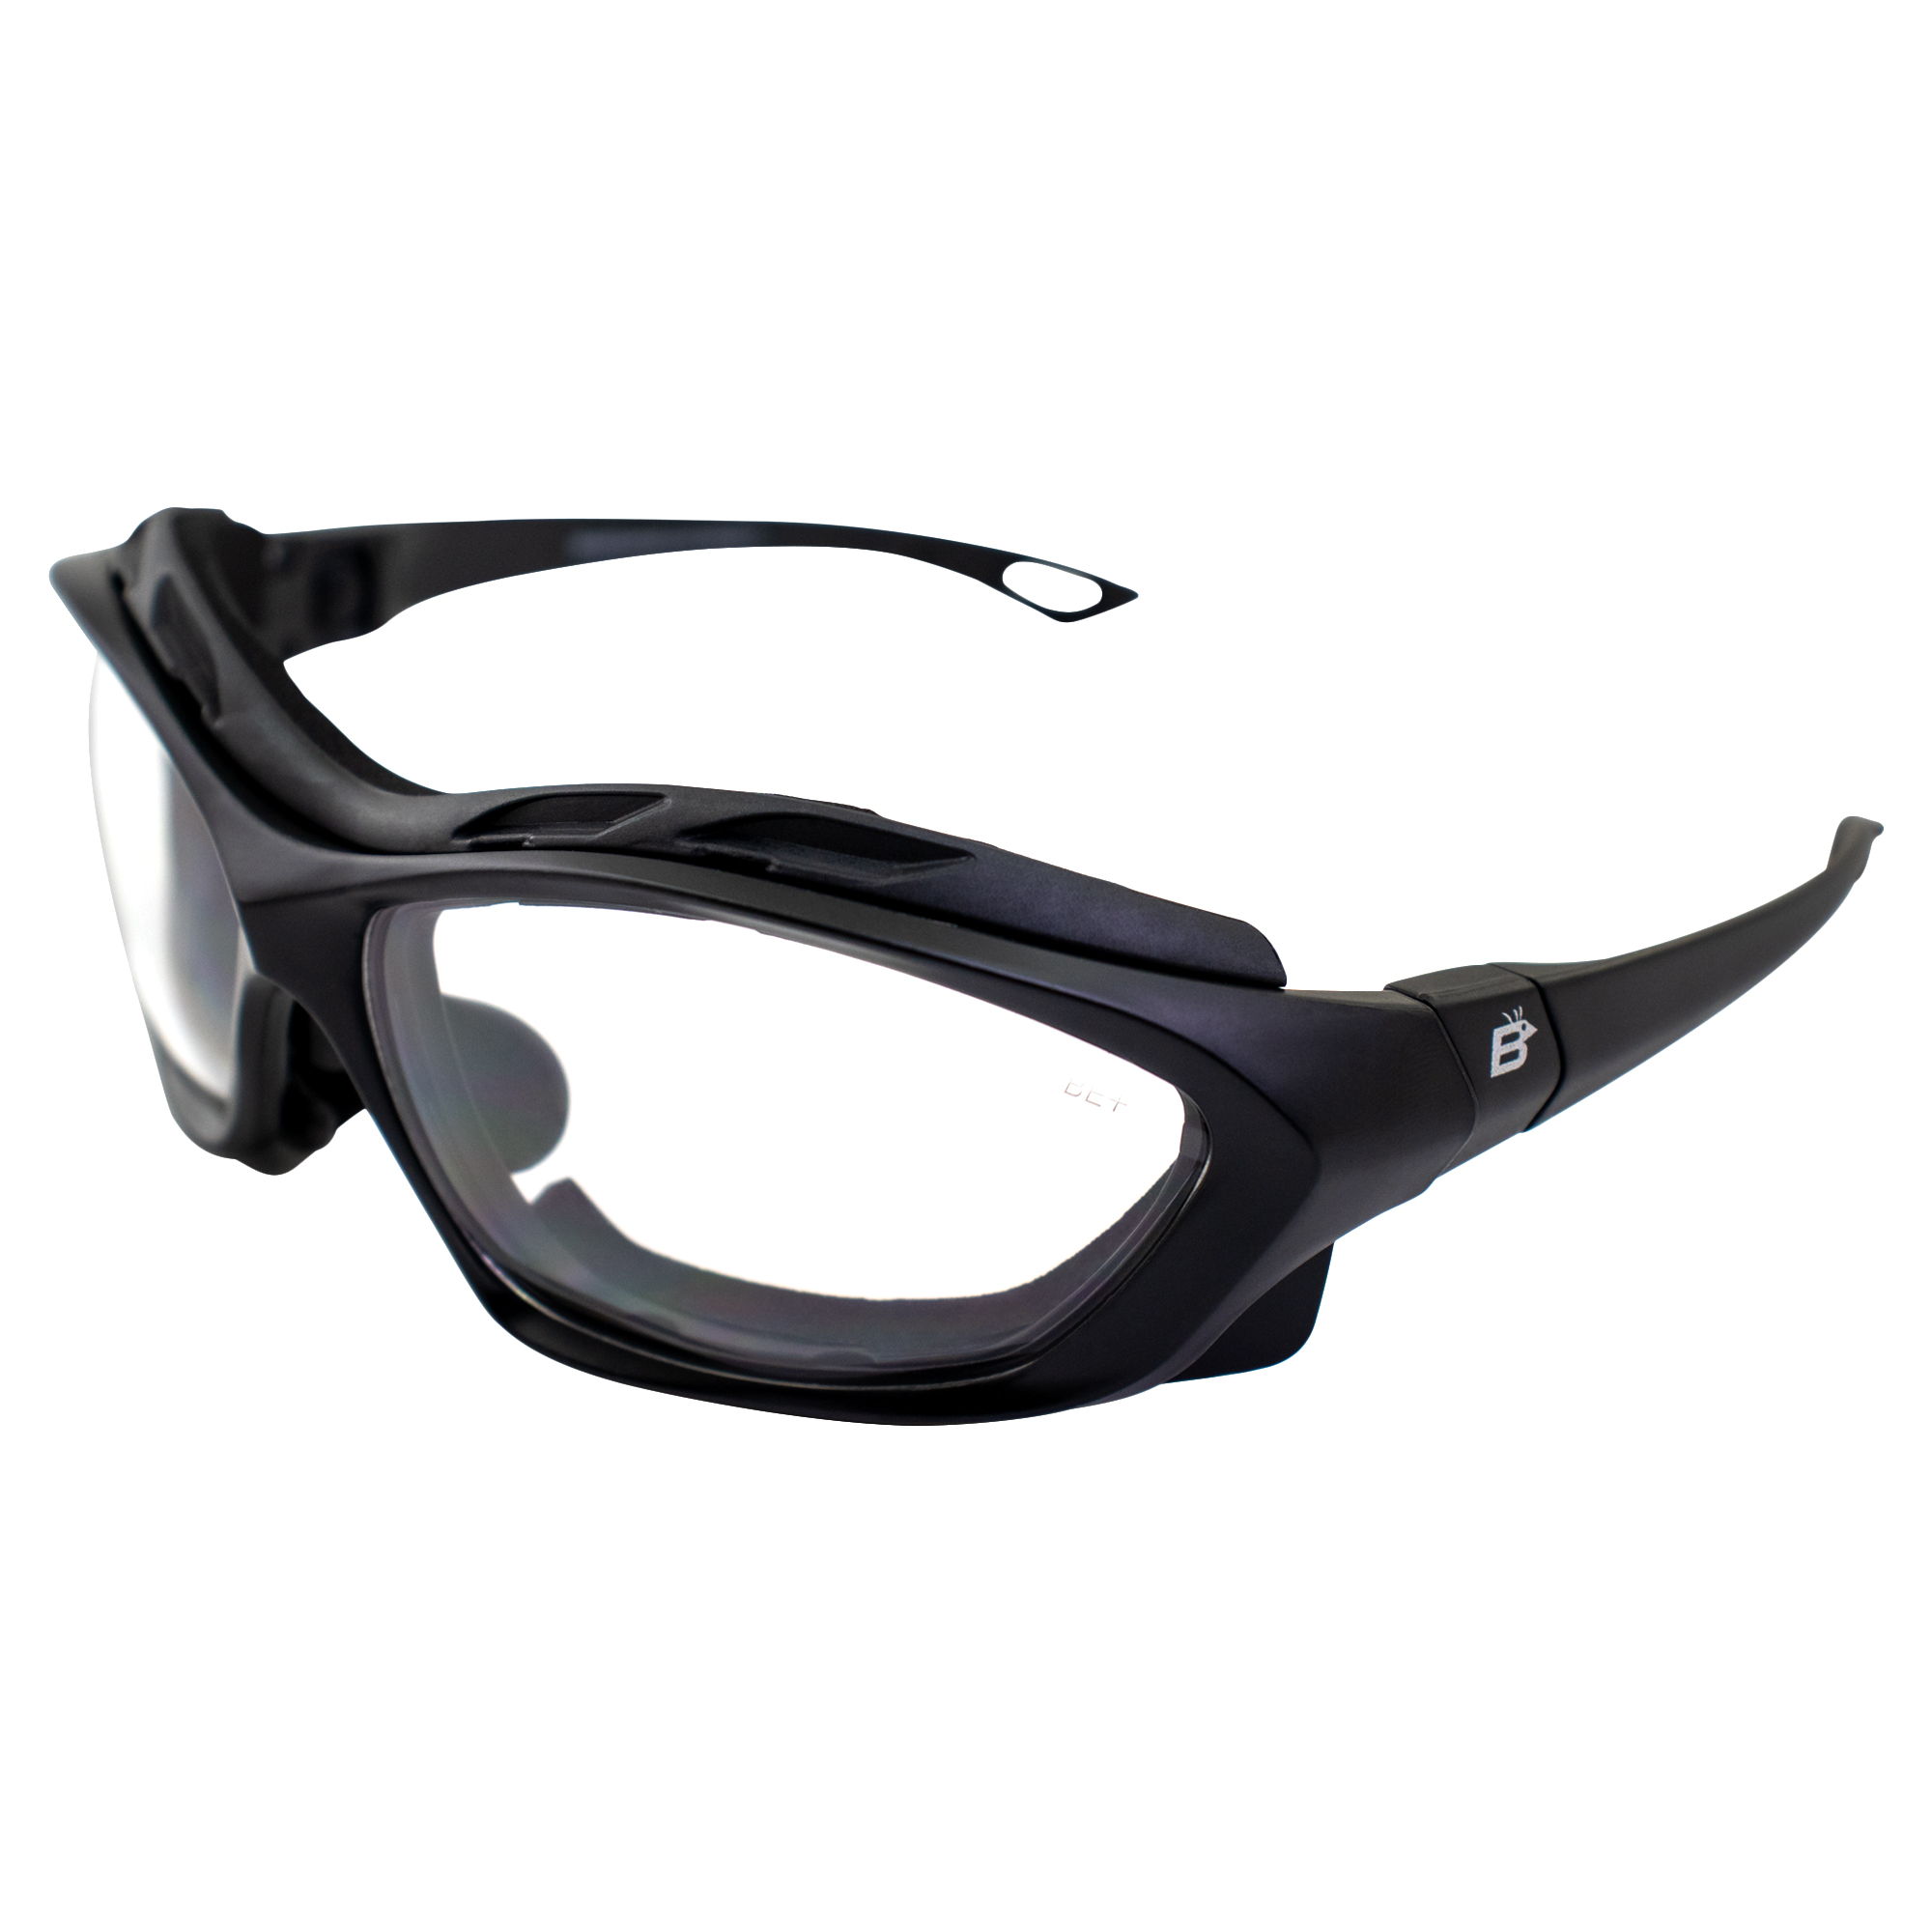 Birdz Eyewear Canopy Padded Motorcycle Sunglasses Riding Safety Glasses ANSI Z87.1 Convertible to Goggles Black Frame (Black-Clear) - image 1 of 6